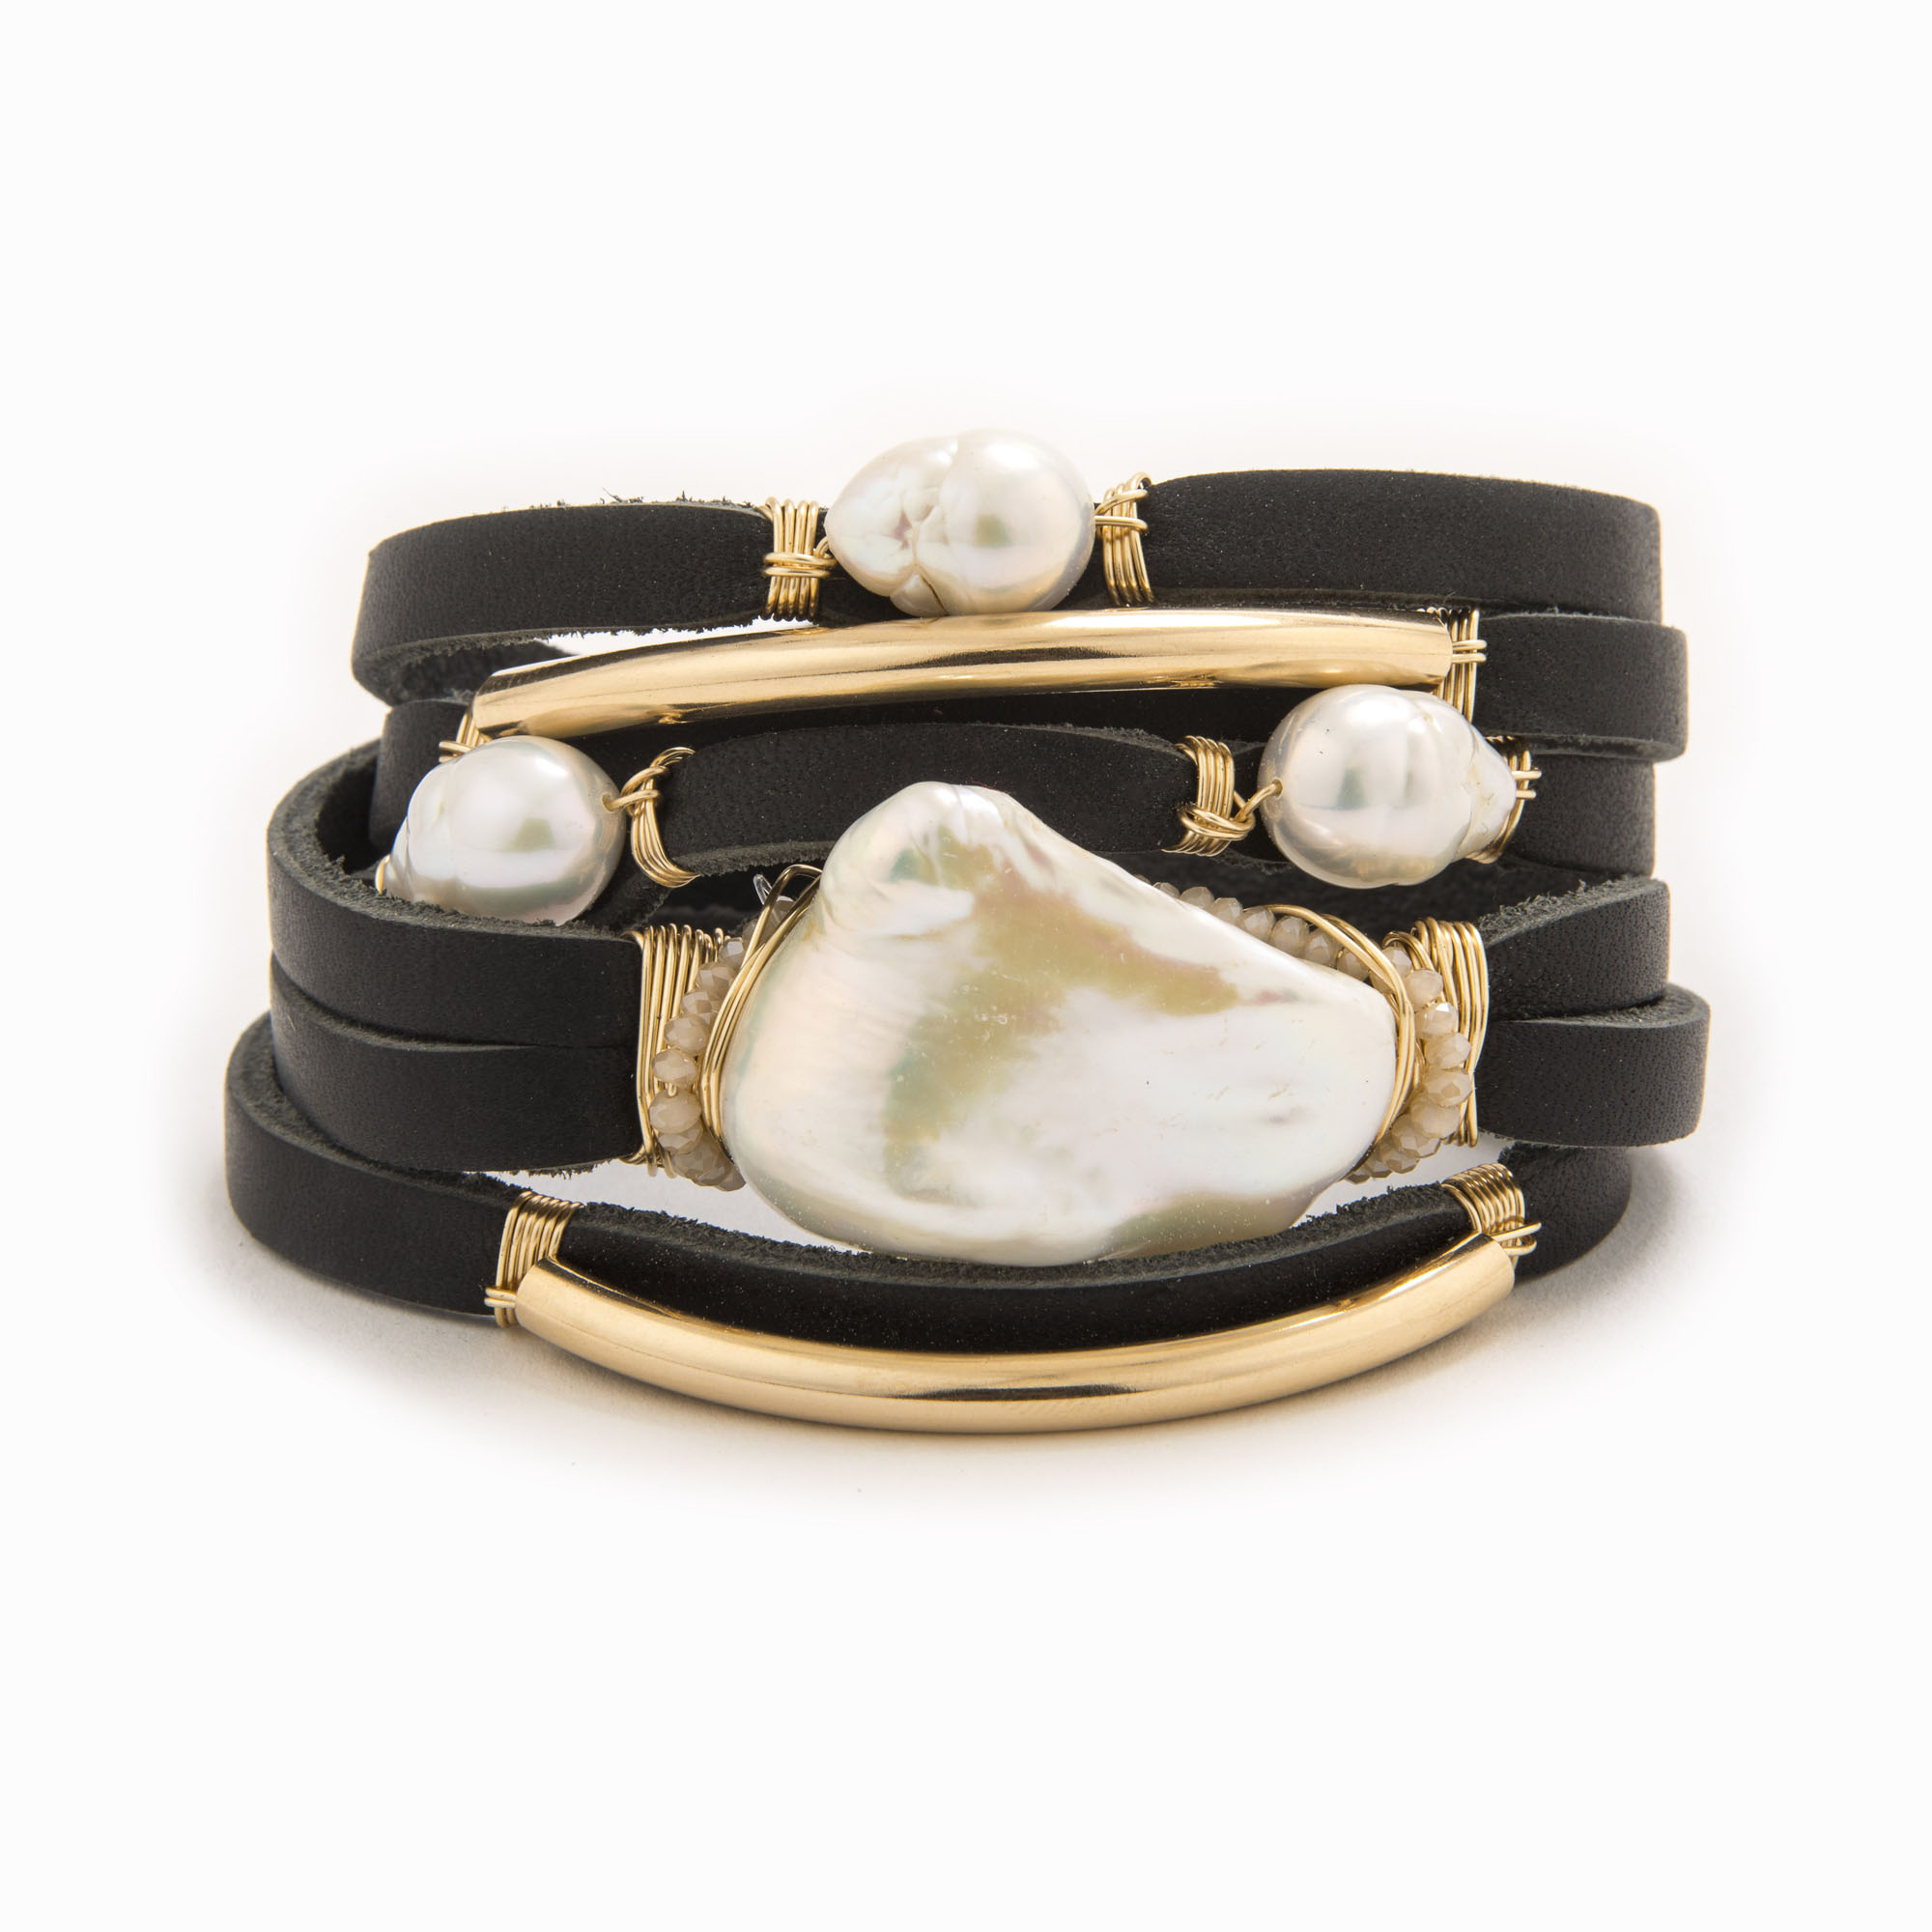 Featured image for “Meave Leather Shred Bracelet”